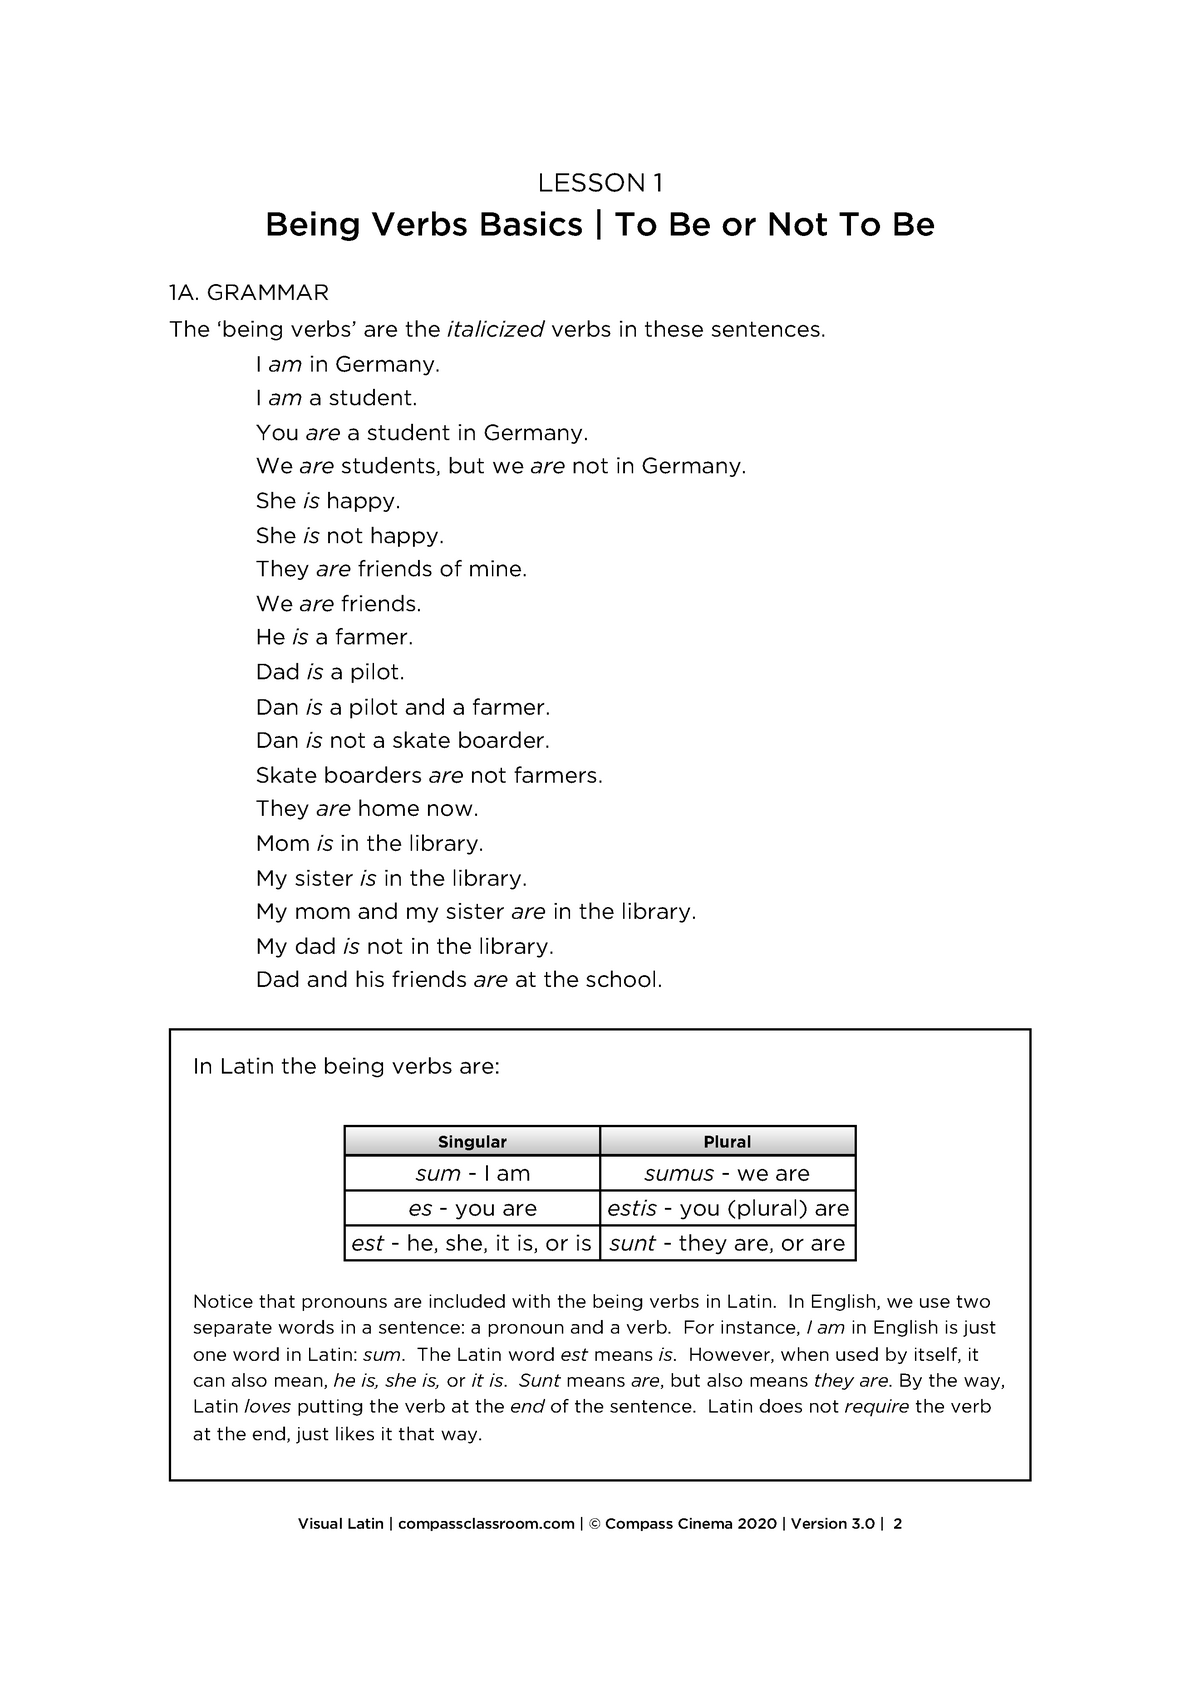 1-to-be-practice-worksheet-being-verbs-basics-to-be-or-not-to-be